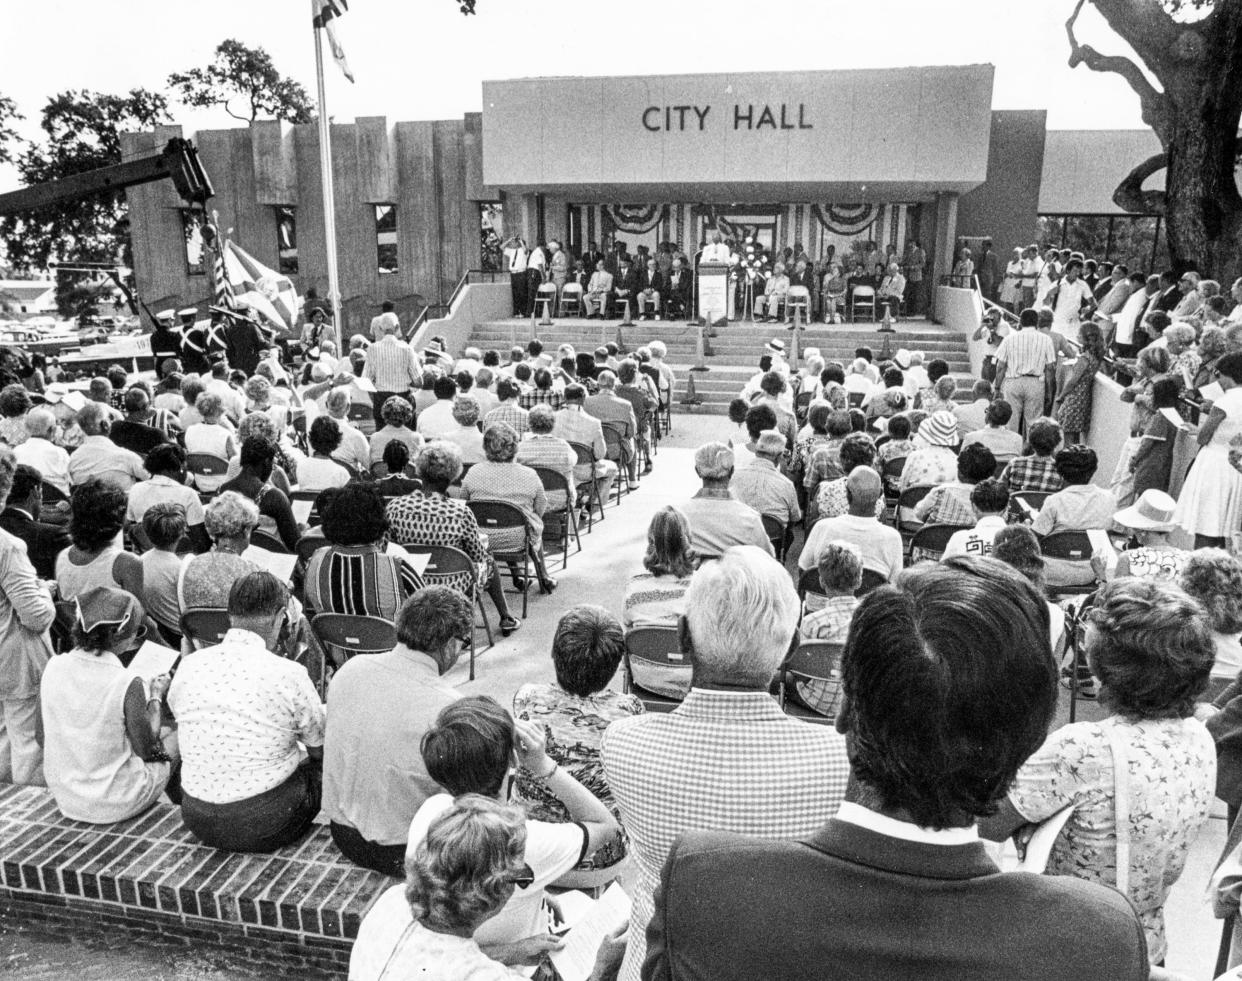 Daytona Beach's city government has run out of its City Hall on the corner of Orange and Ridgewood avenues for 47 years. Now top city staff are looking into the possibility of building a new City Hall in a different location. Pictured is the dedication ceremony for the current City Hall in July 1976, which cost $1.5 million to build.